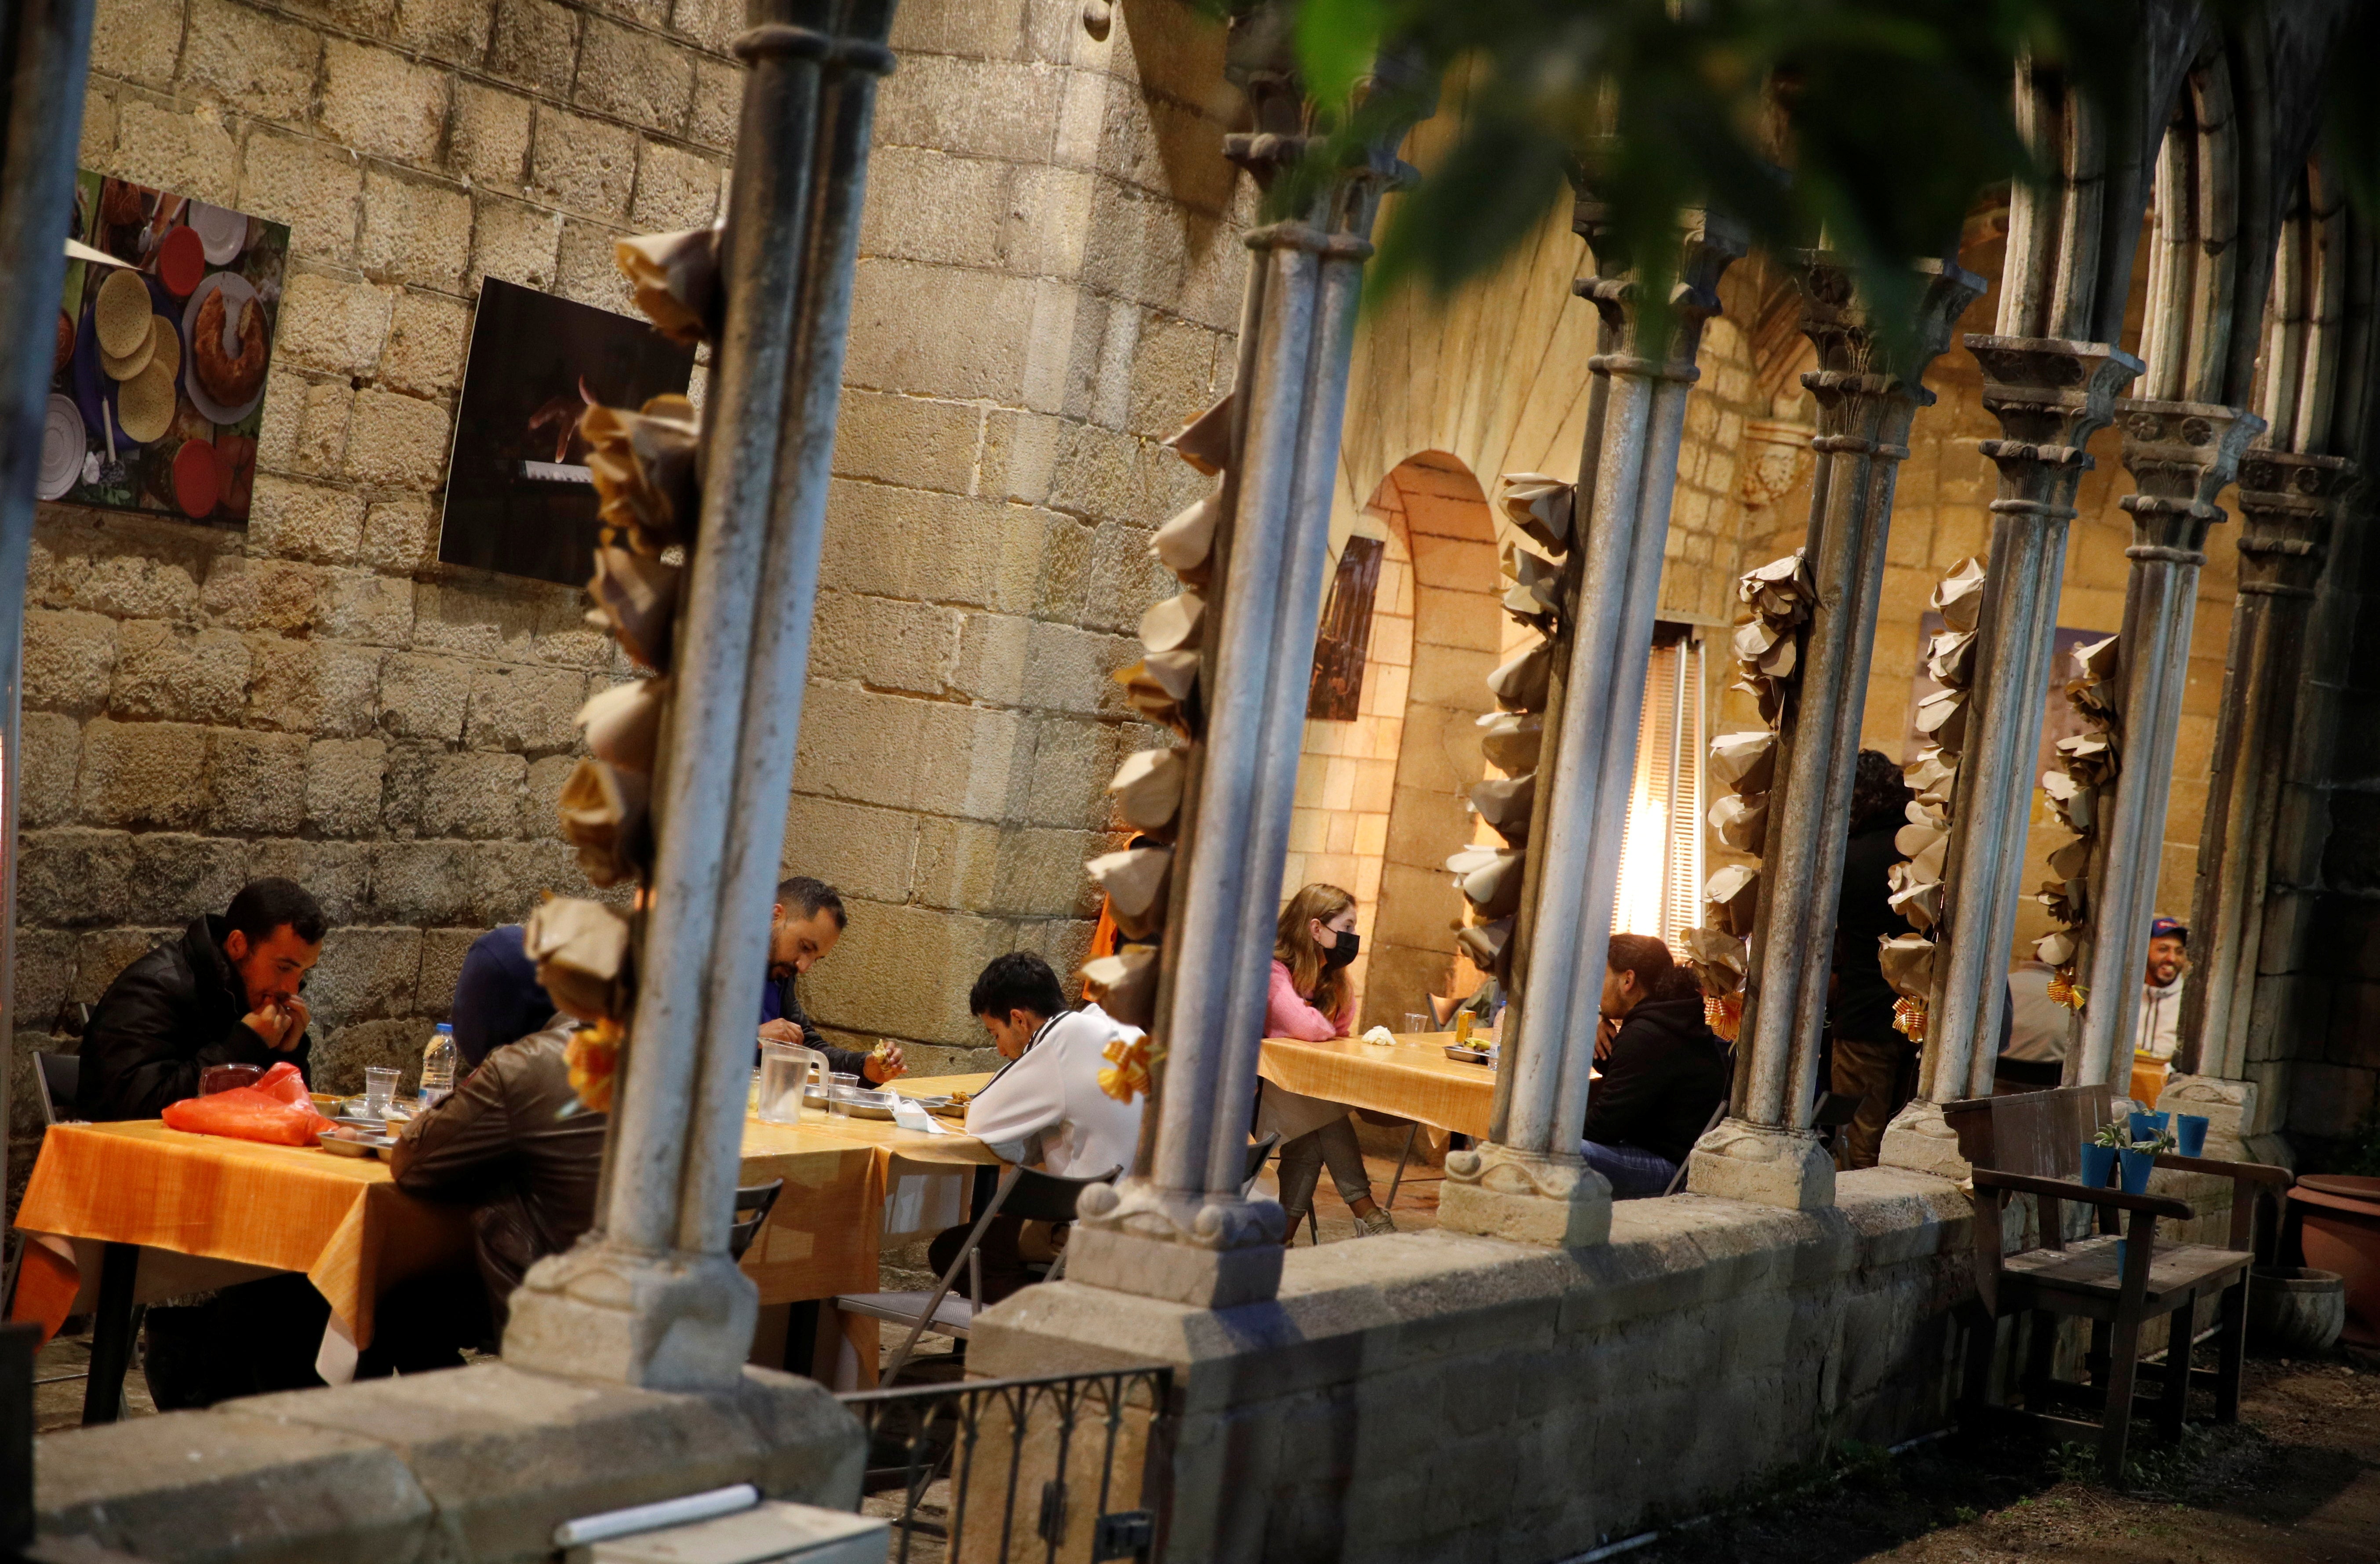 Every evening between 50 and 60 muslims stream into the cloisters for dinner